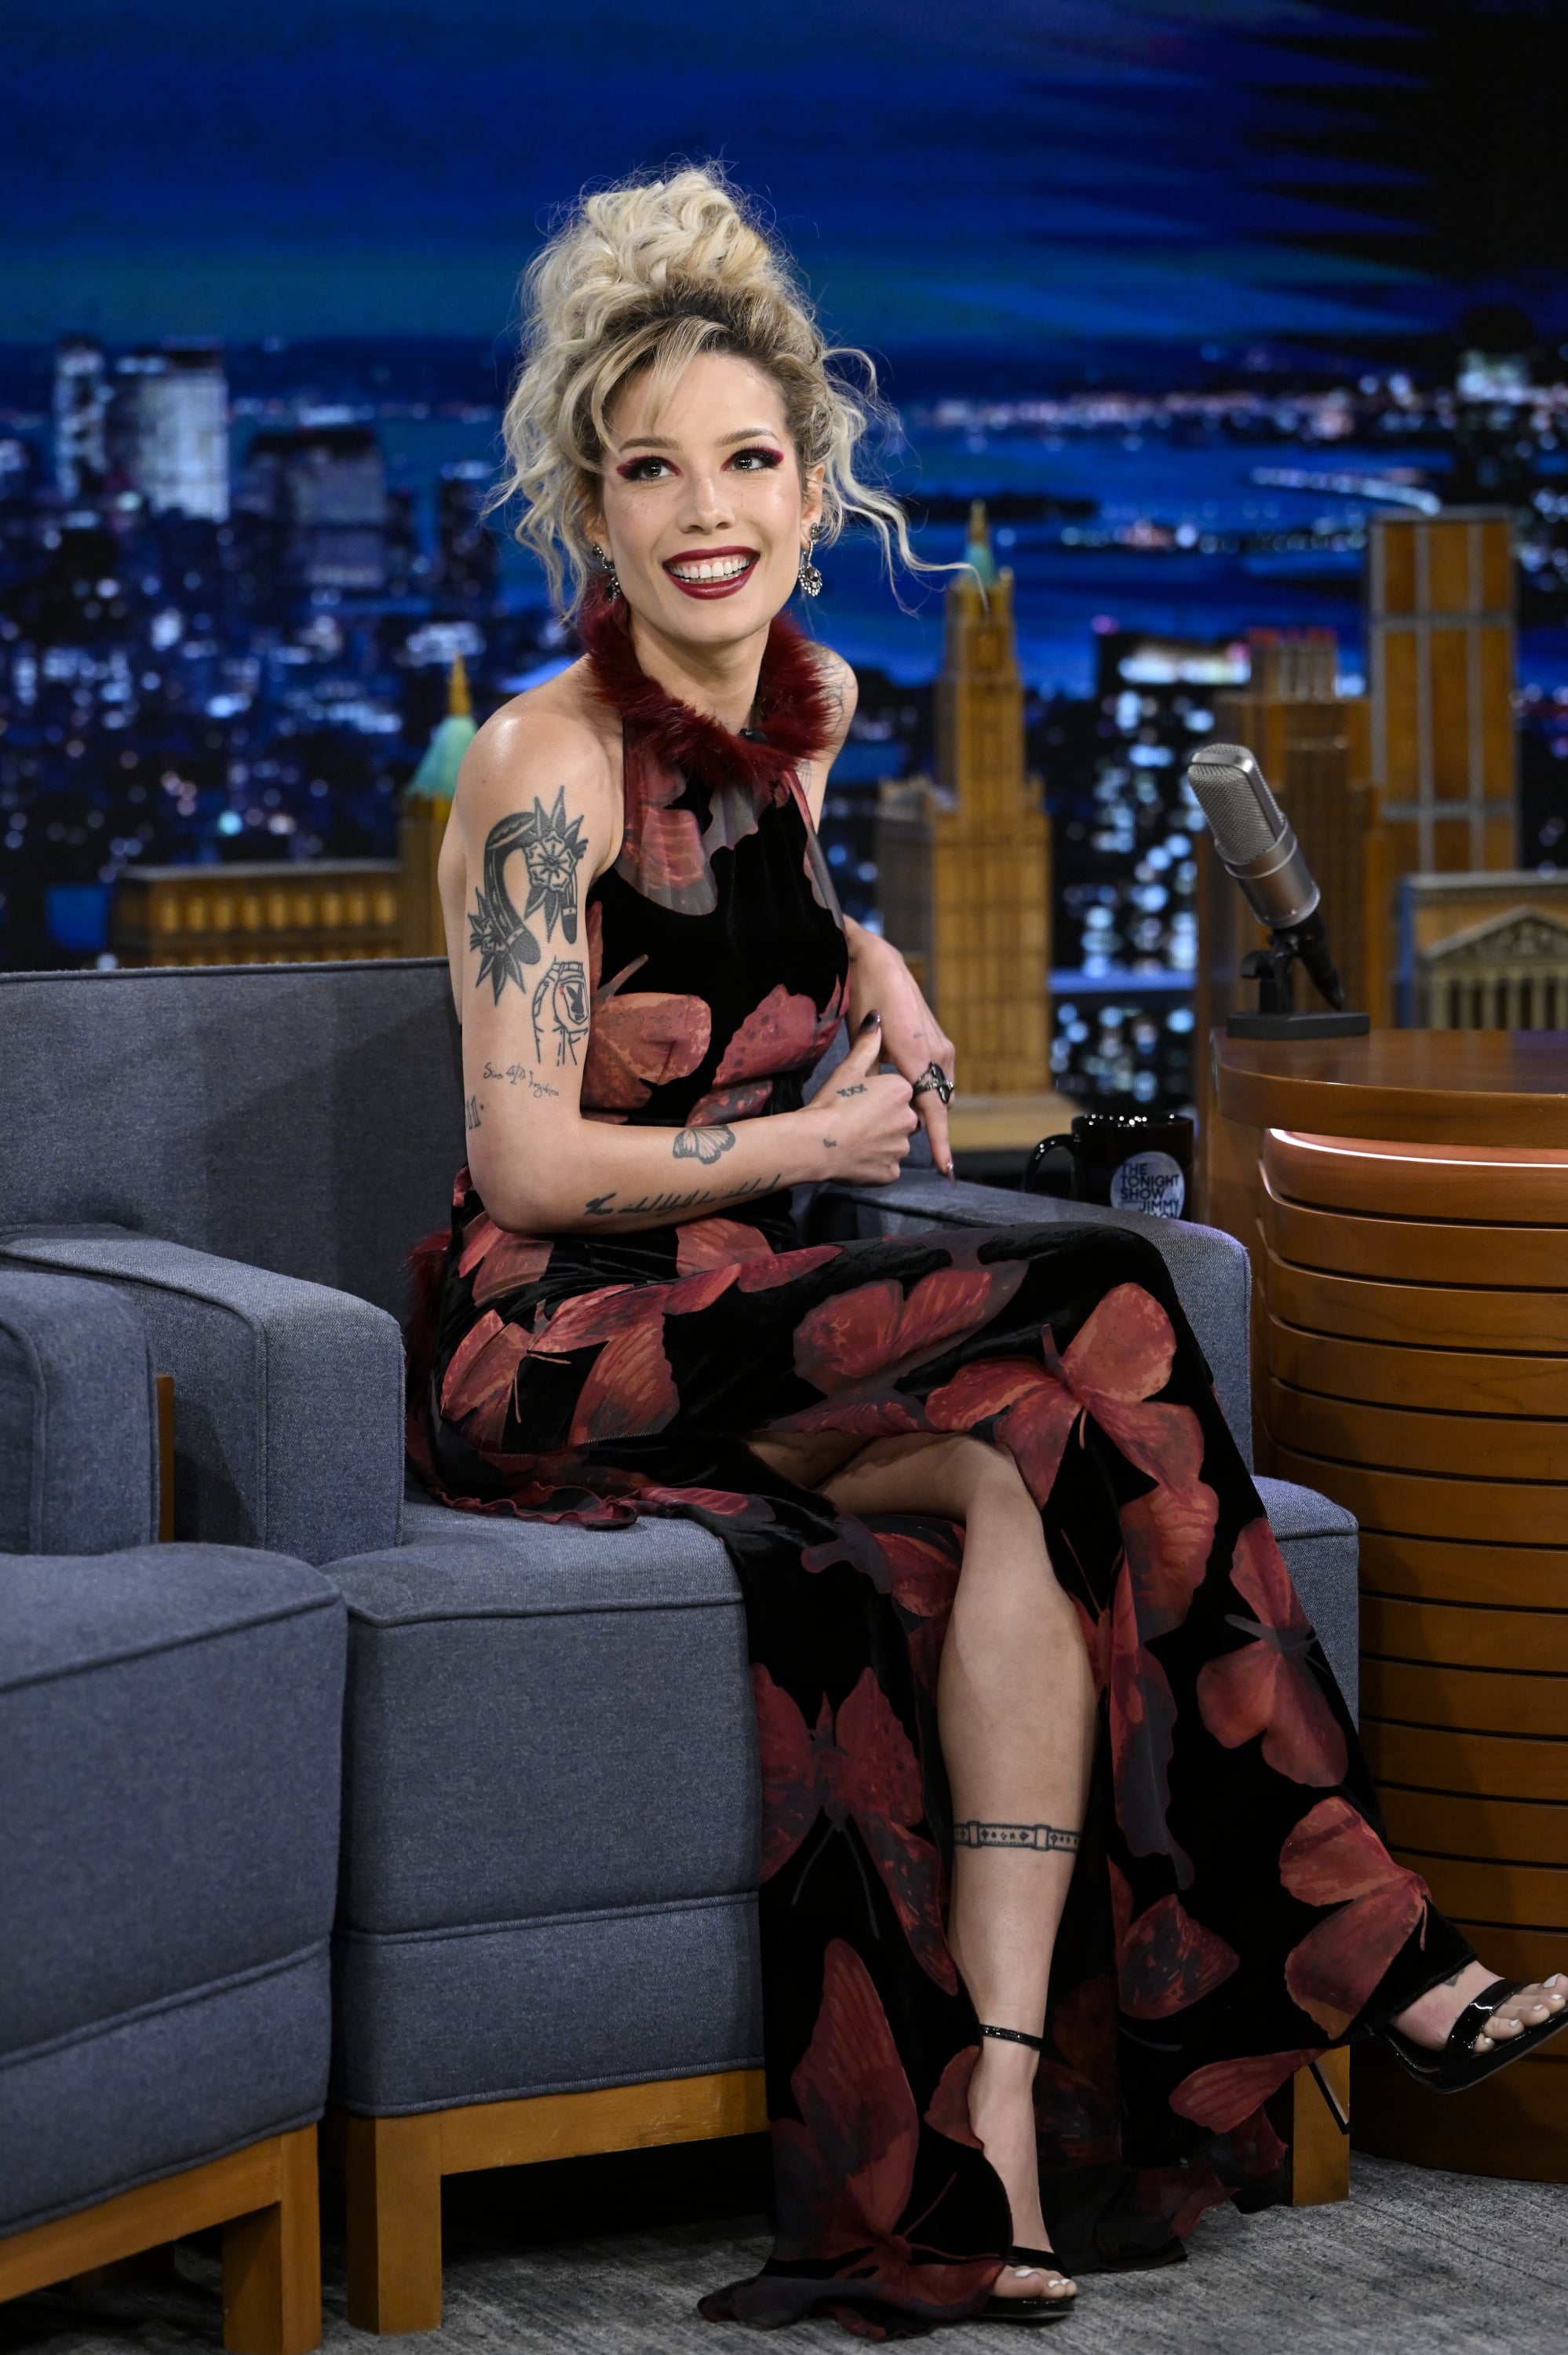 THE TONIGHT SHOW STARRING JIMMY FALLON -- Episode 1669 -- Pictured: Singer Halsey during an interview on Monday, June 13, 2022 -- (Photo by: Todd Owyoung/NBC/NBCU Photo Bank via Getty Images)